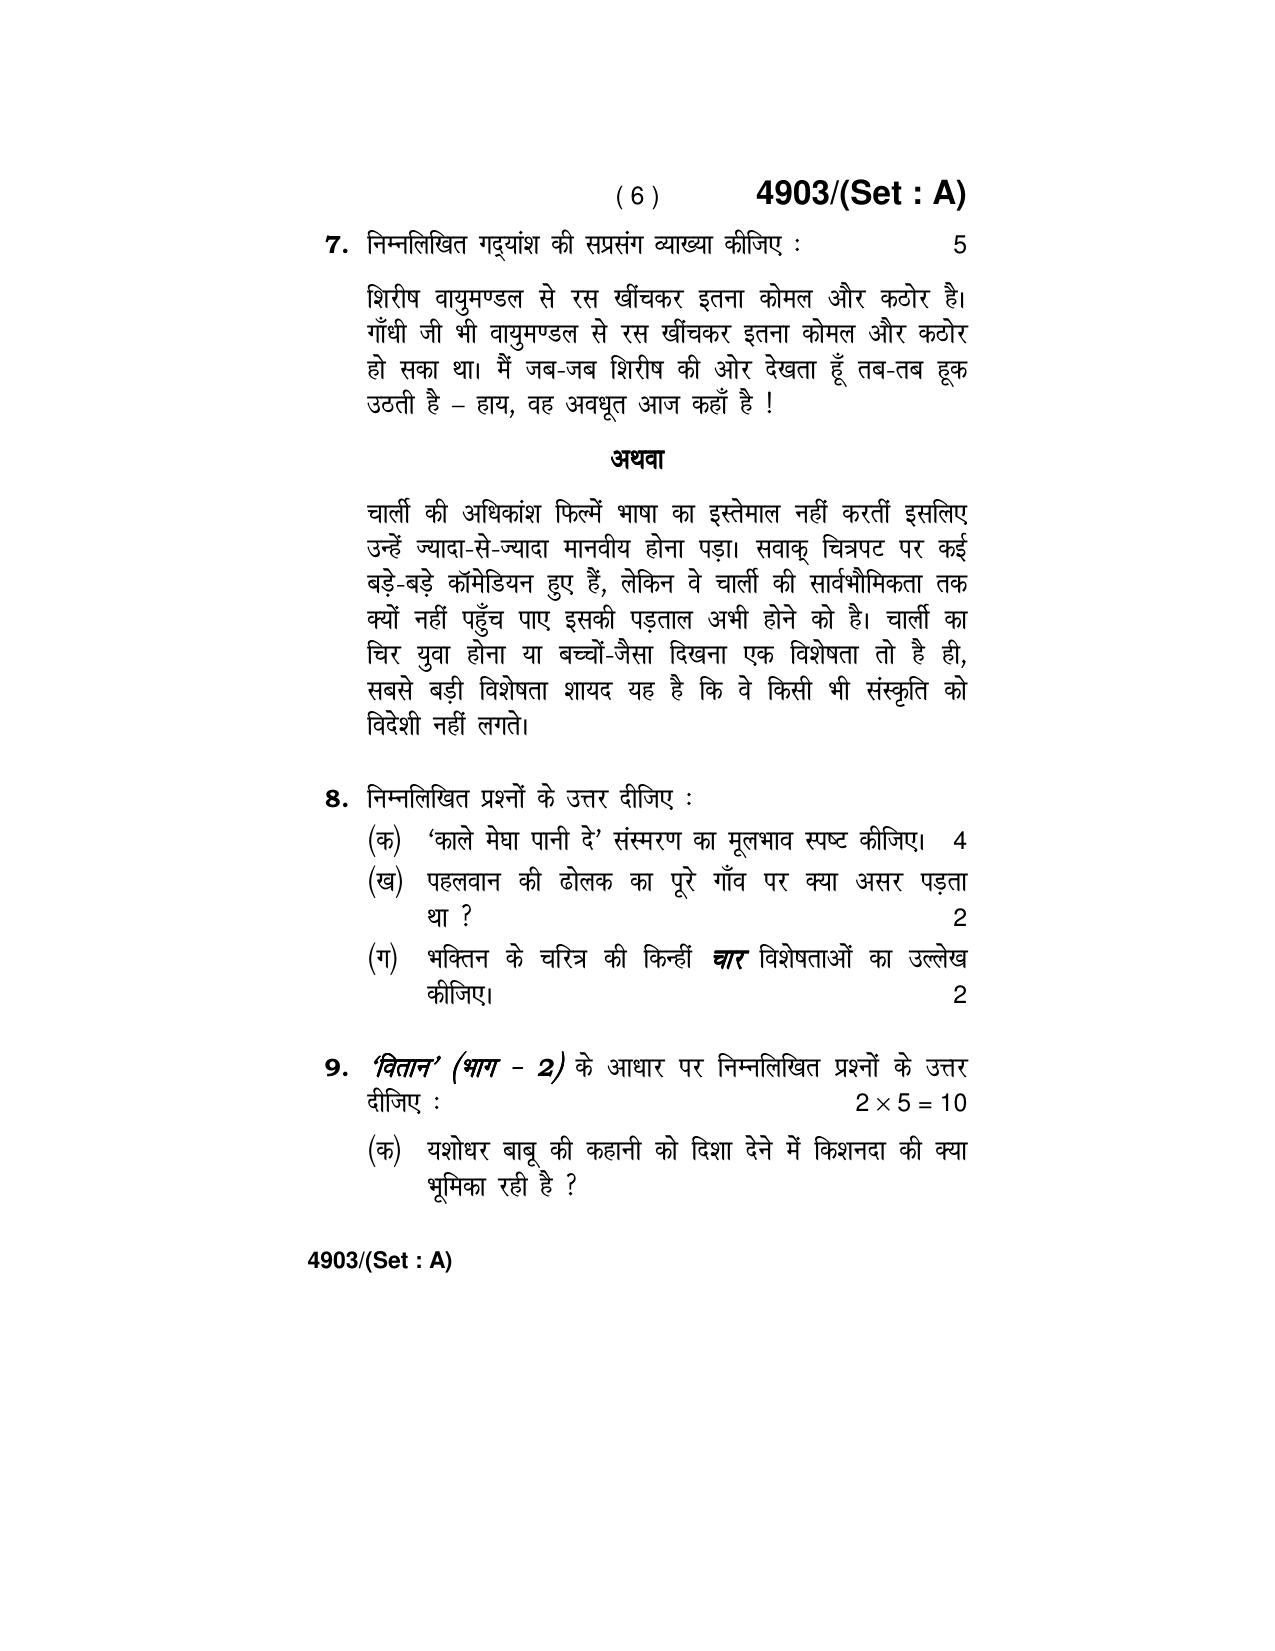 Haryana Board HBSE Class 12 Hindi Core 2020 Question Paper - Page 6